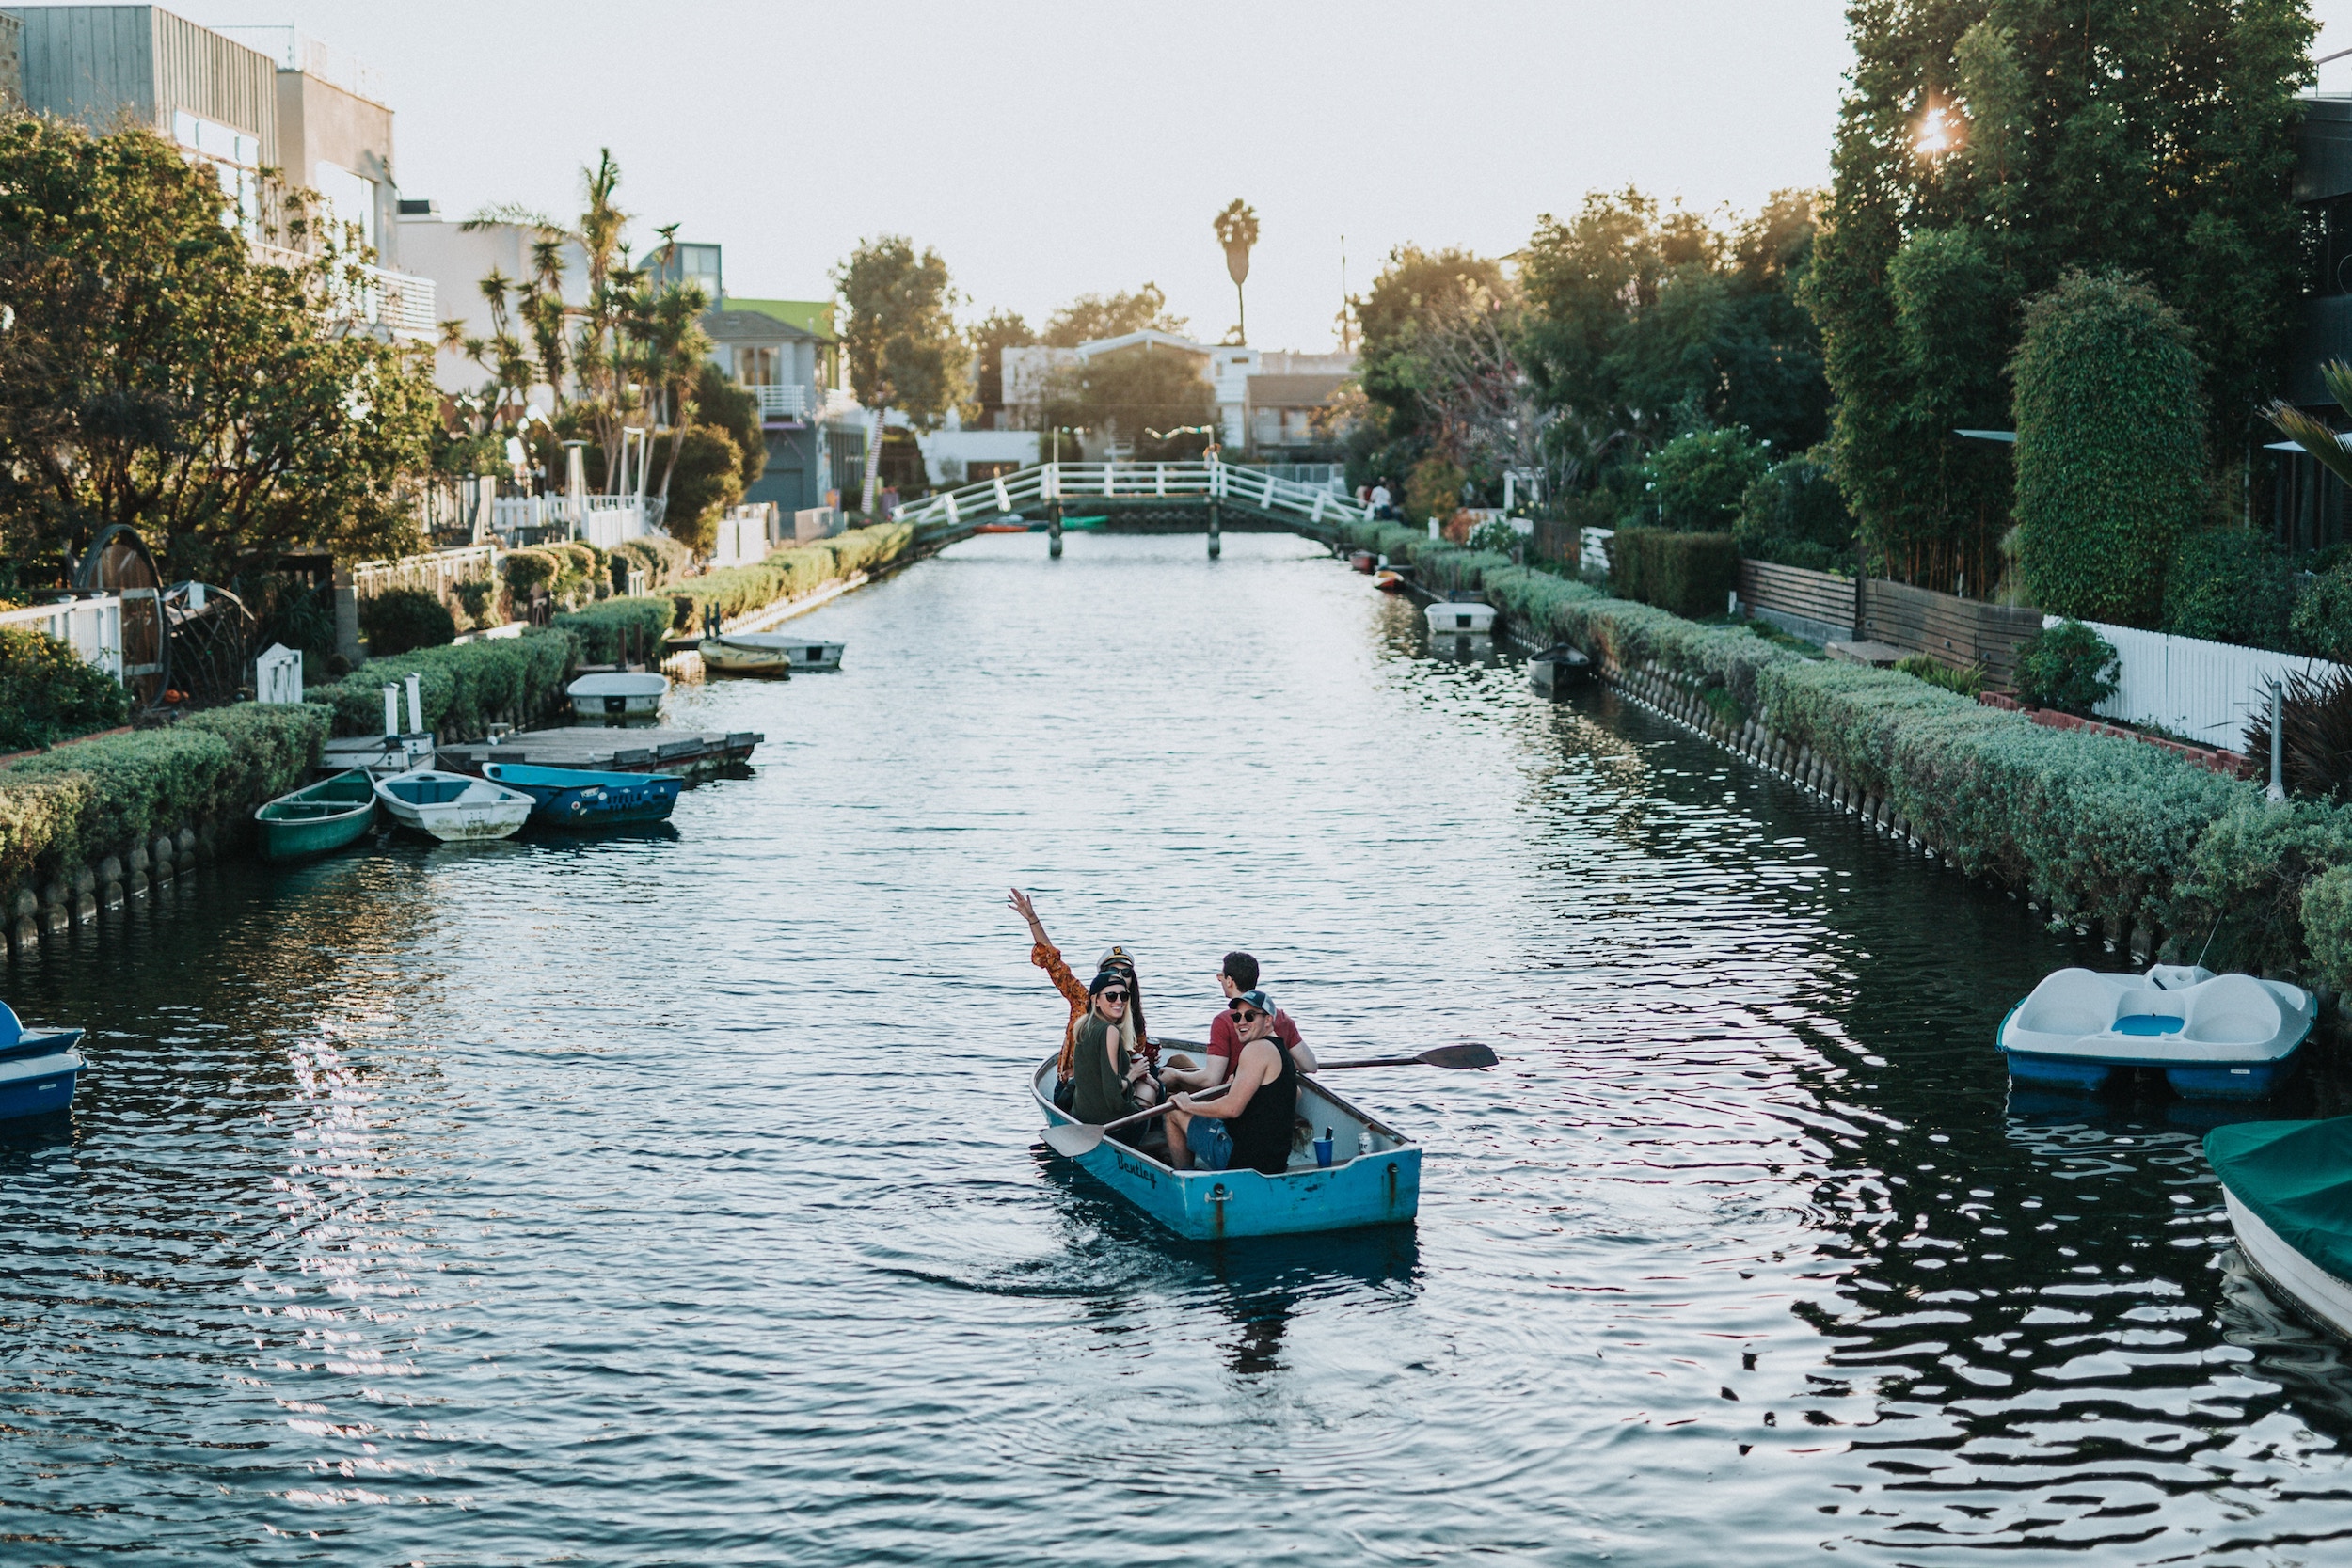 Venice Canals, Los Angeles, United States